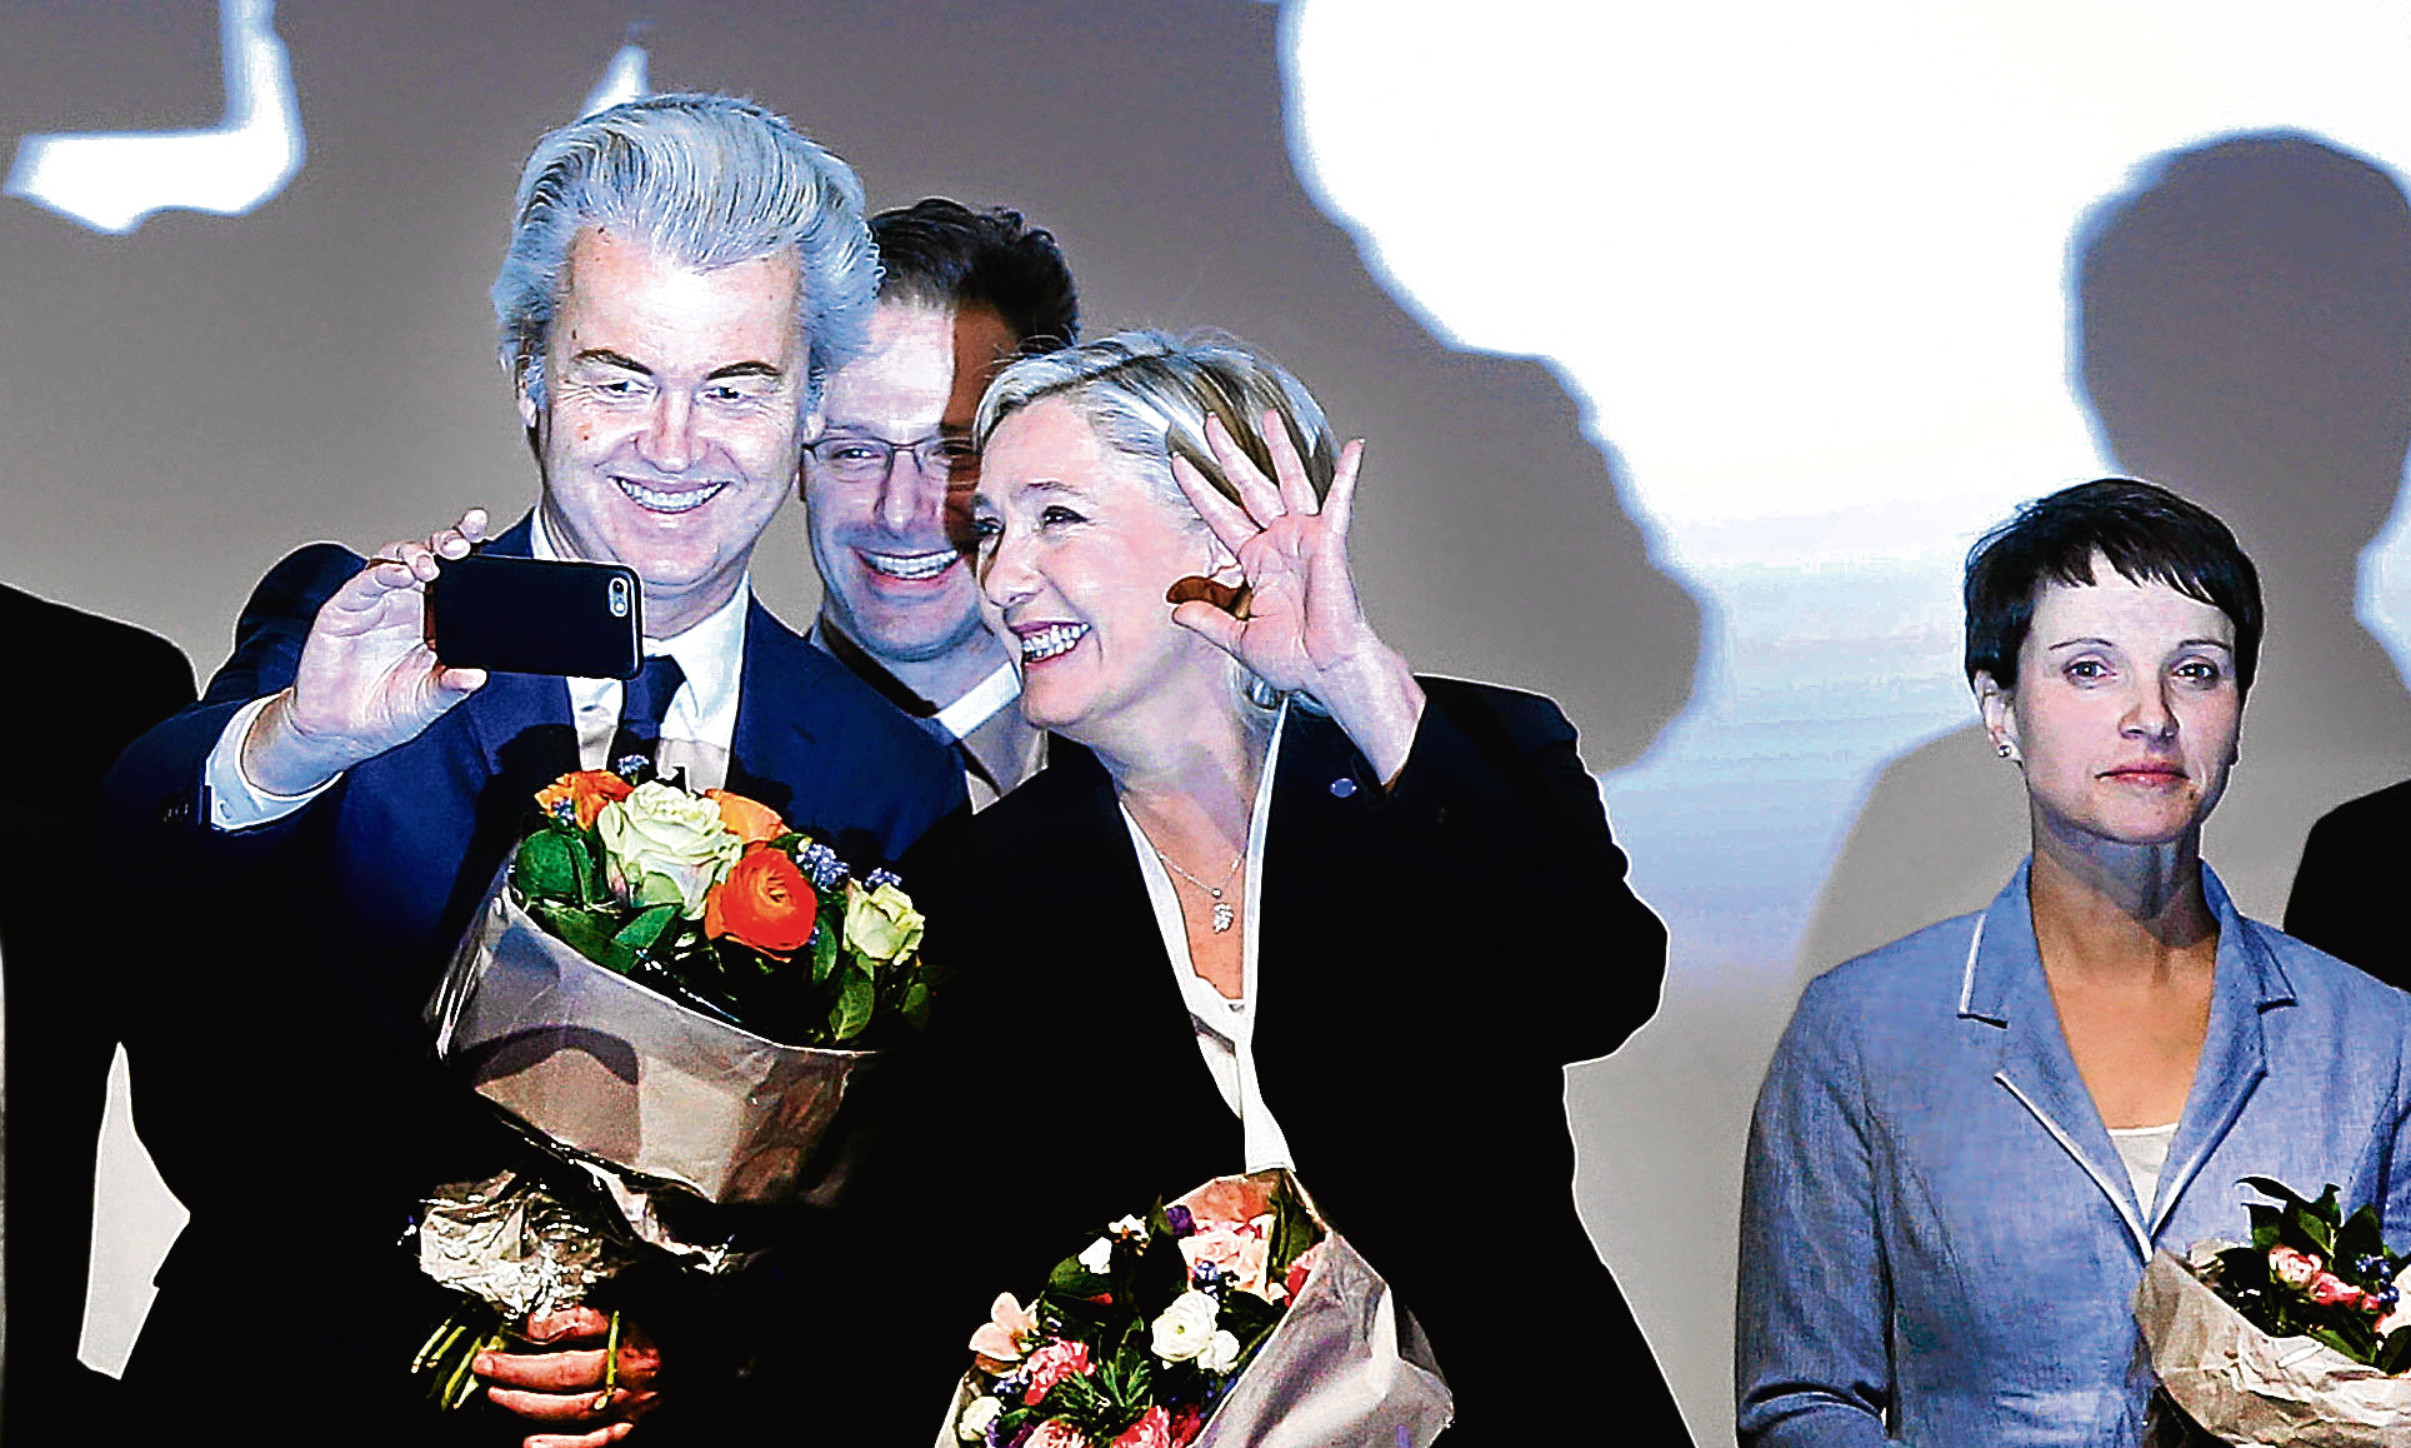 Geert Wilders and Marine le Pen at a meeting of nationalists in Koblenz at the weekend, a gathering Alex says we should be fearful of.